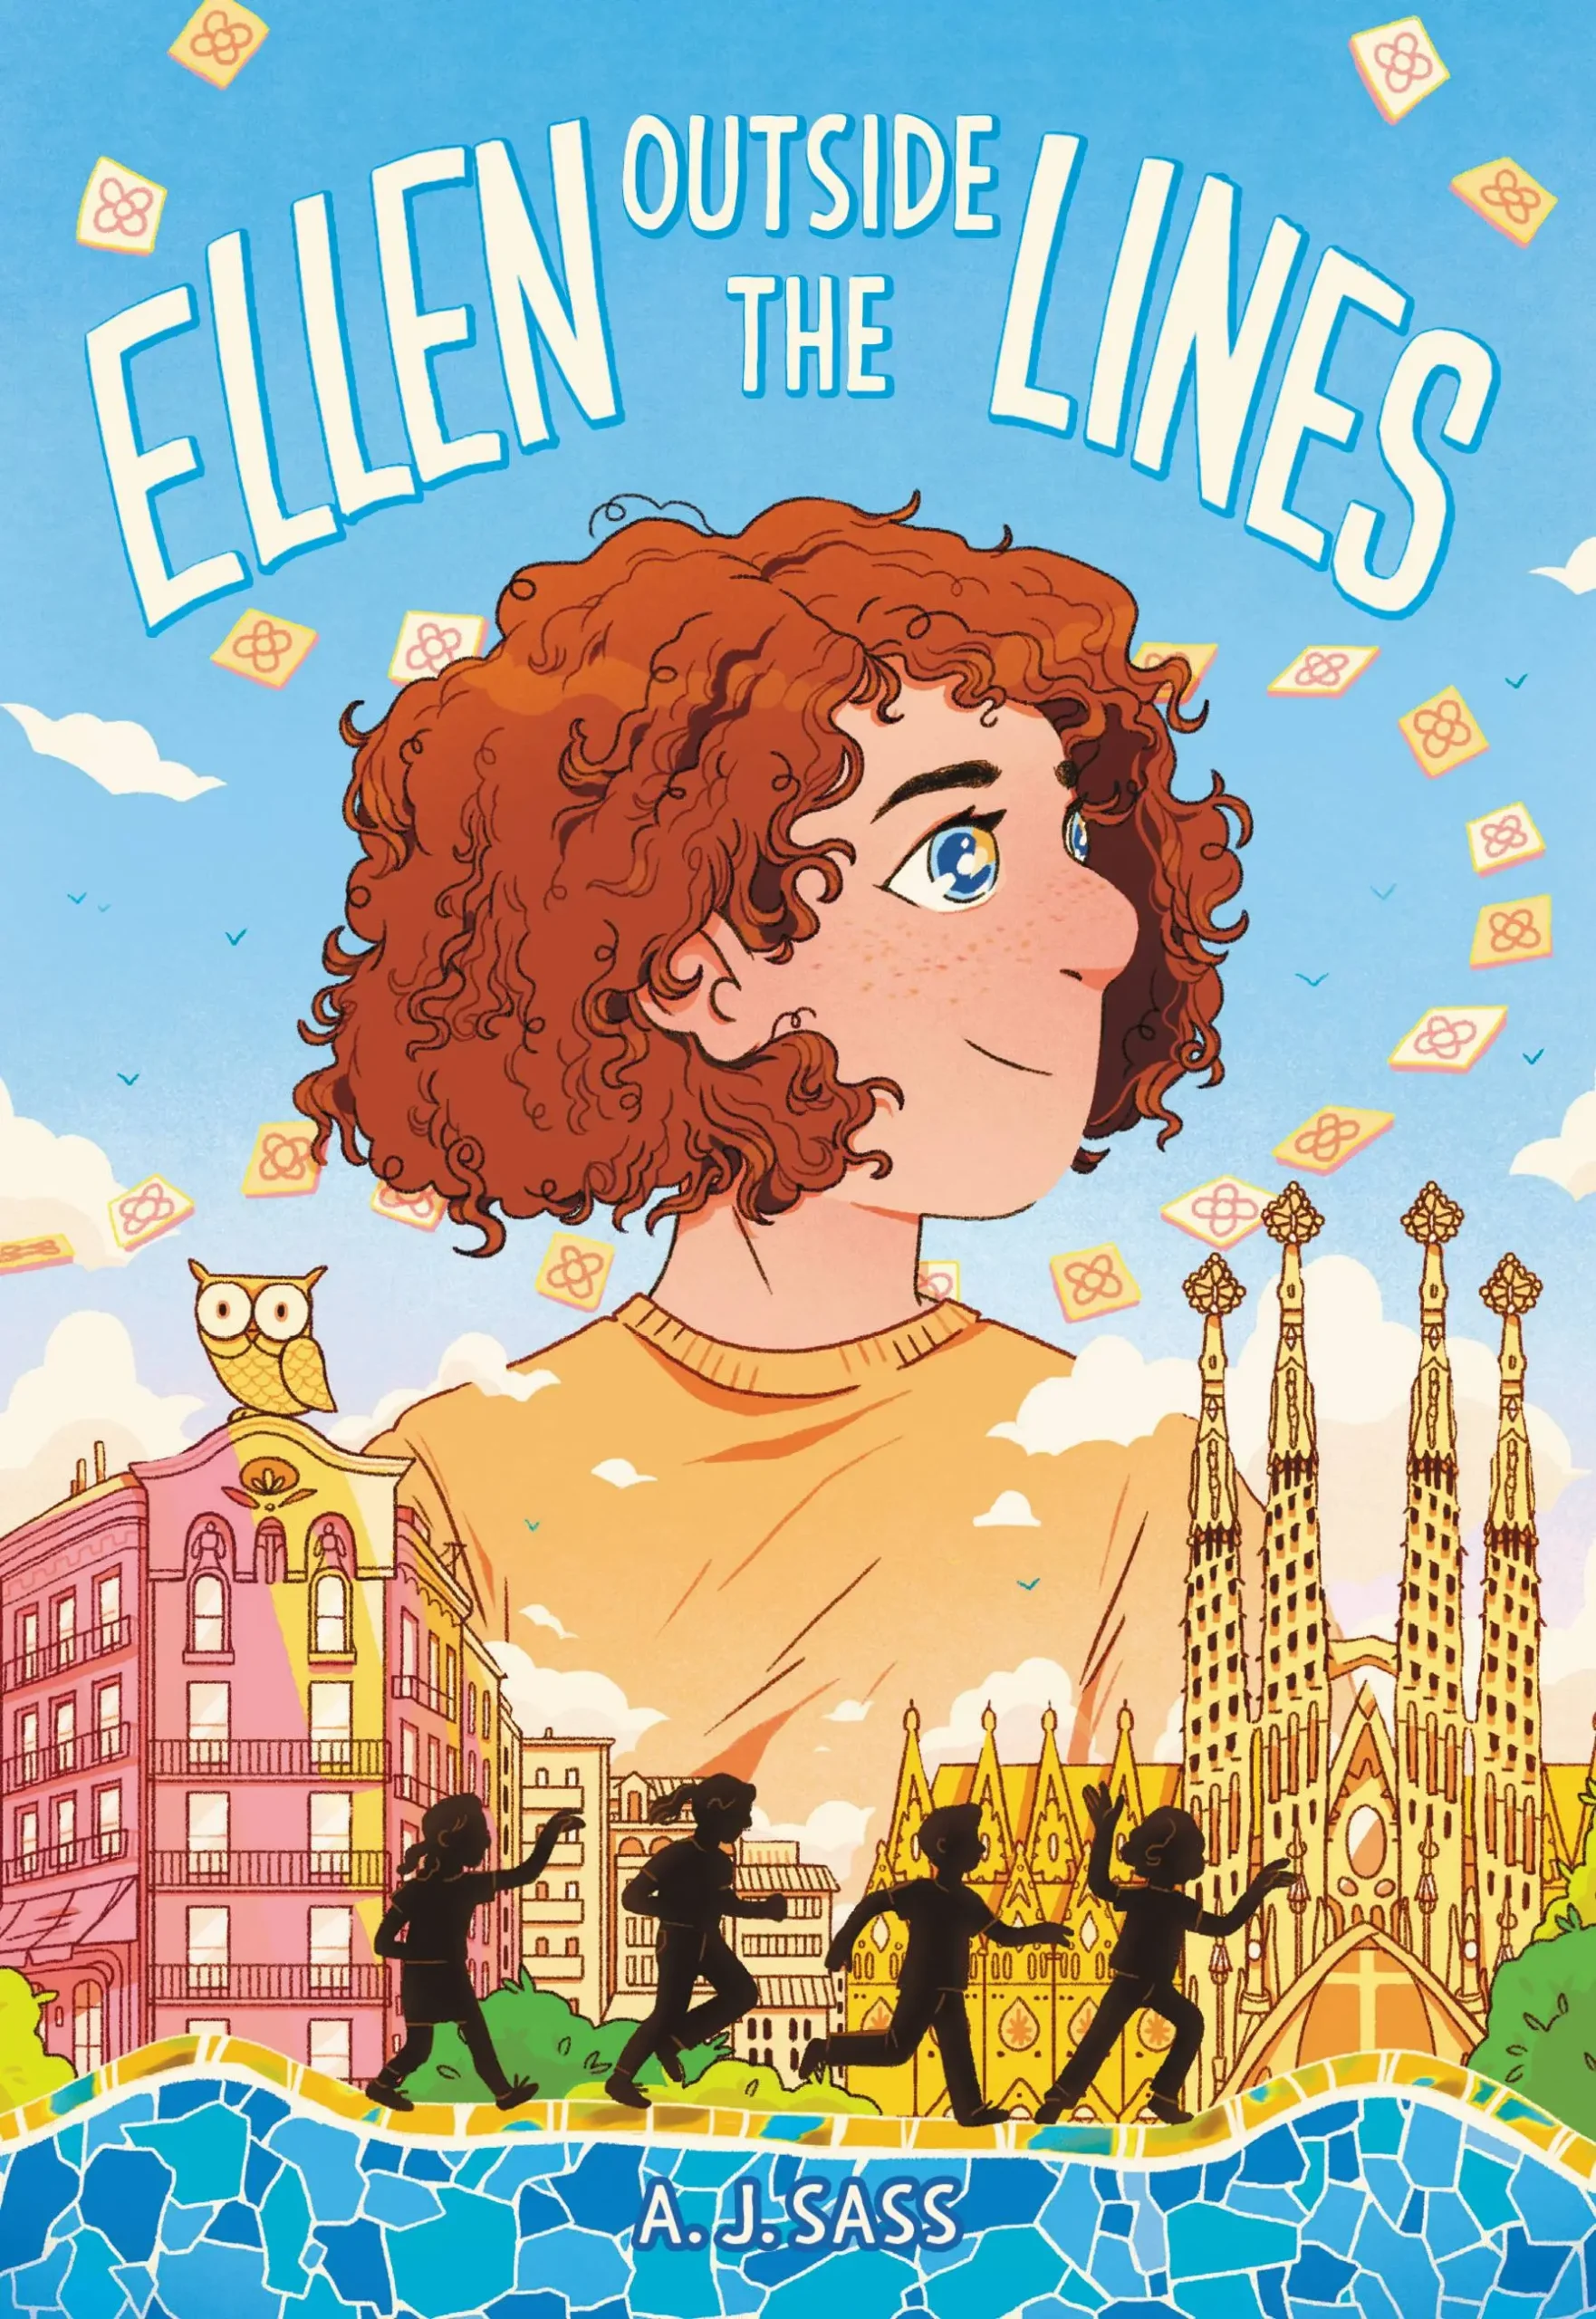 Ellen Outside The Lines by A.J. Sass - middle school books 